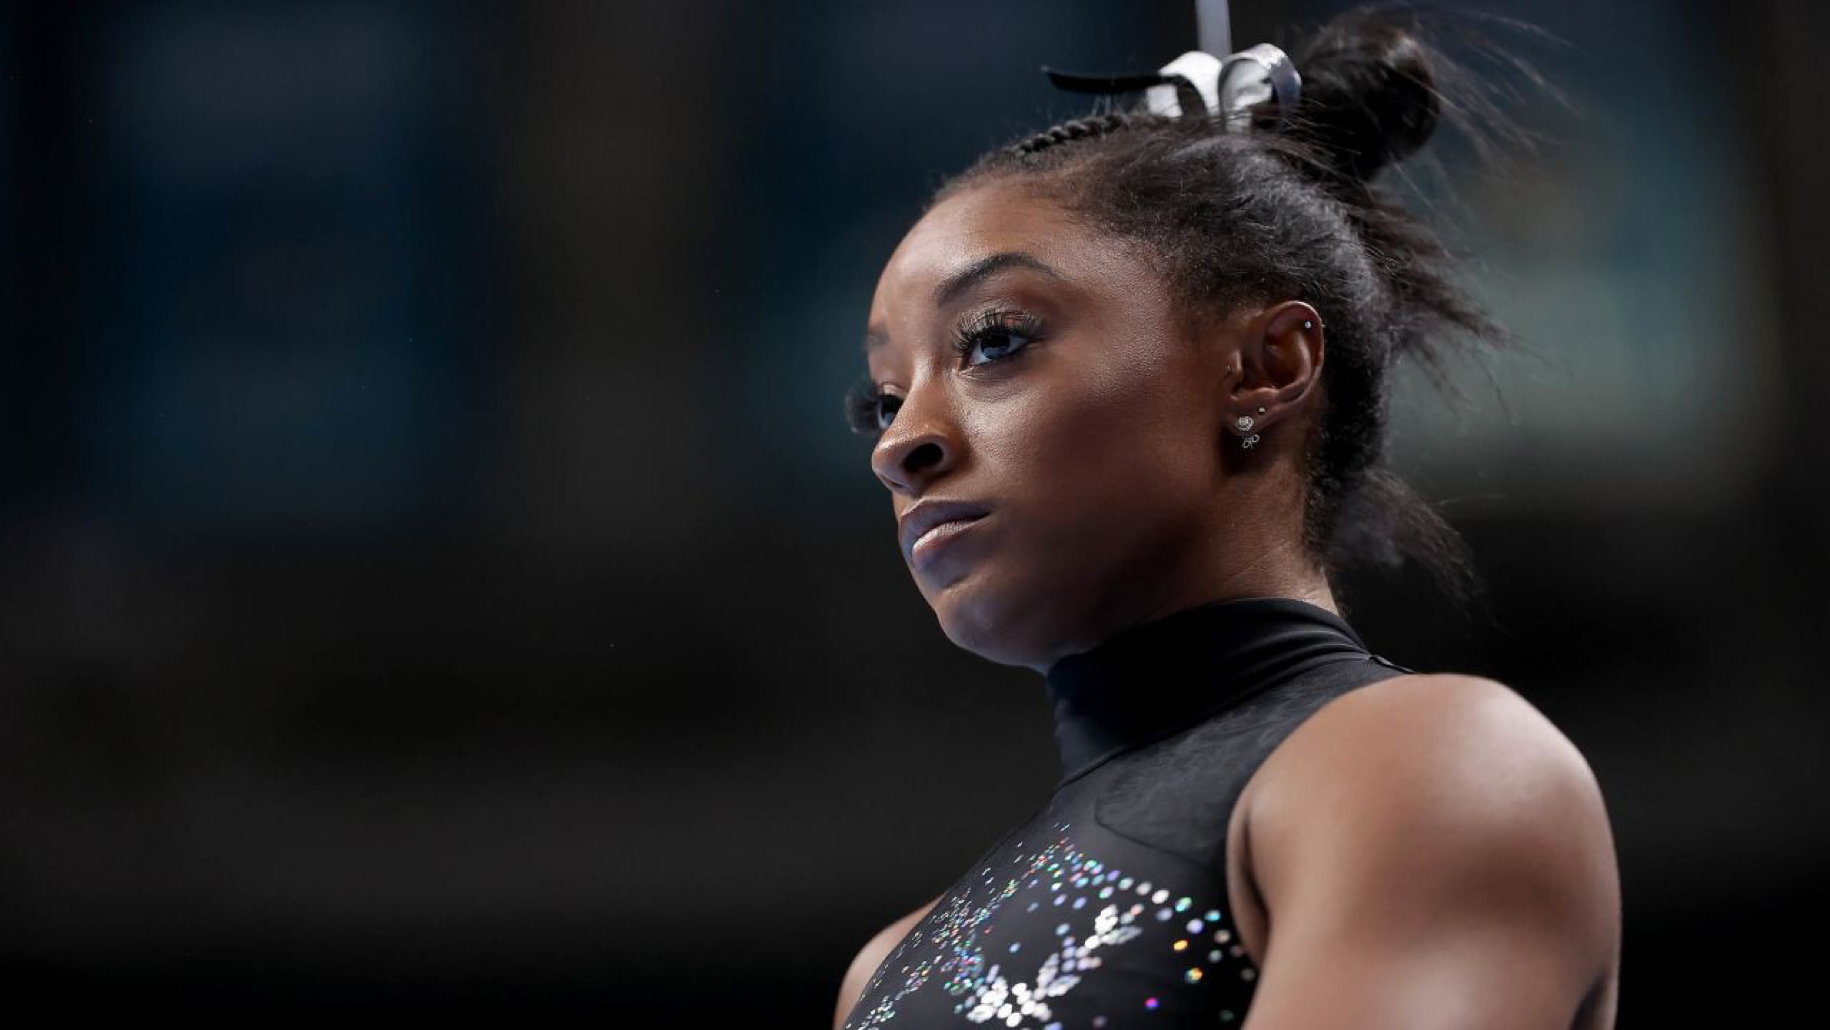 You are currently viewing Simone Biles says it ‘broke my heart’ to see footage of a Black girl ignored in gymnastics ceremony